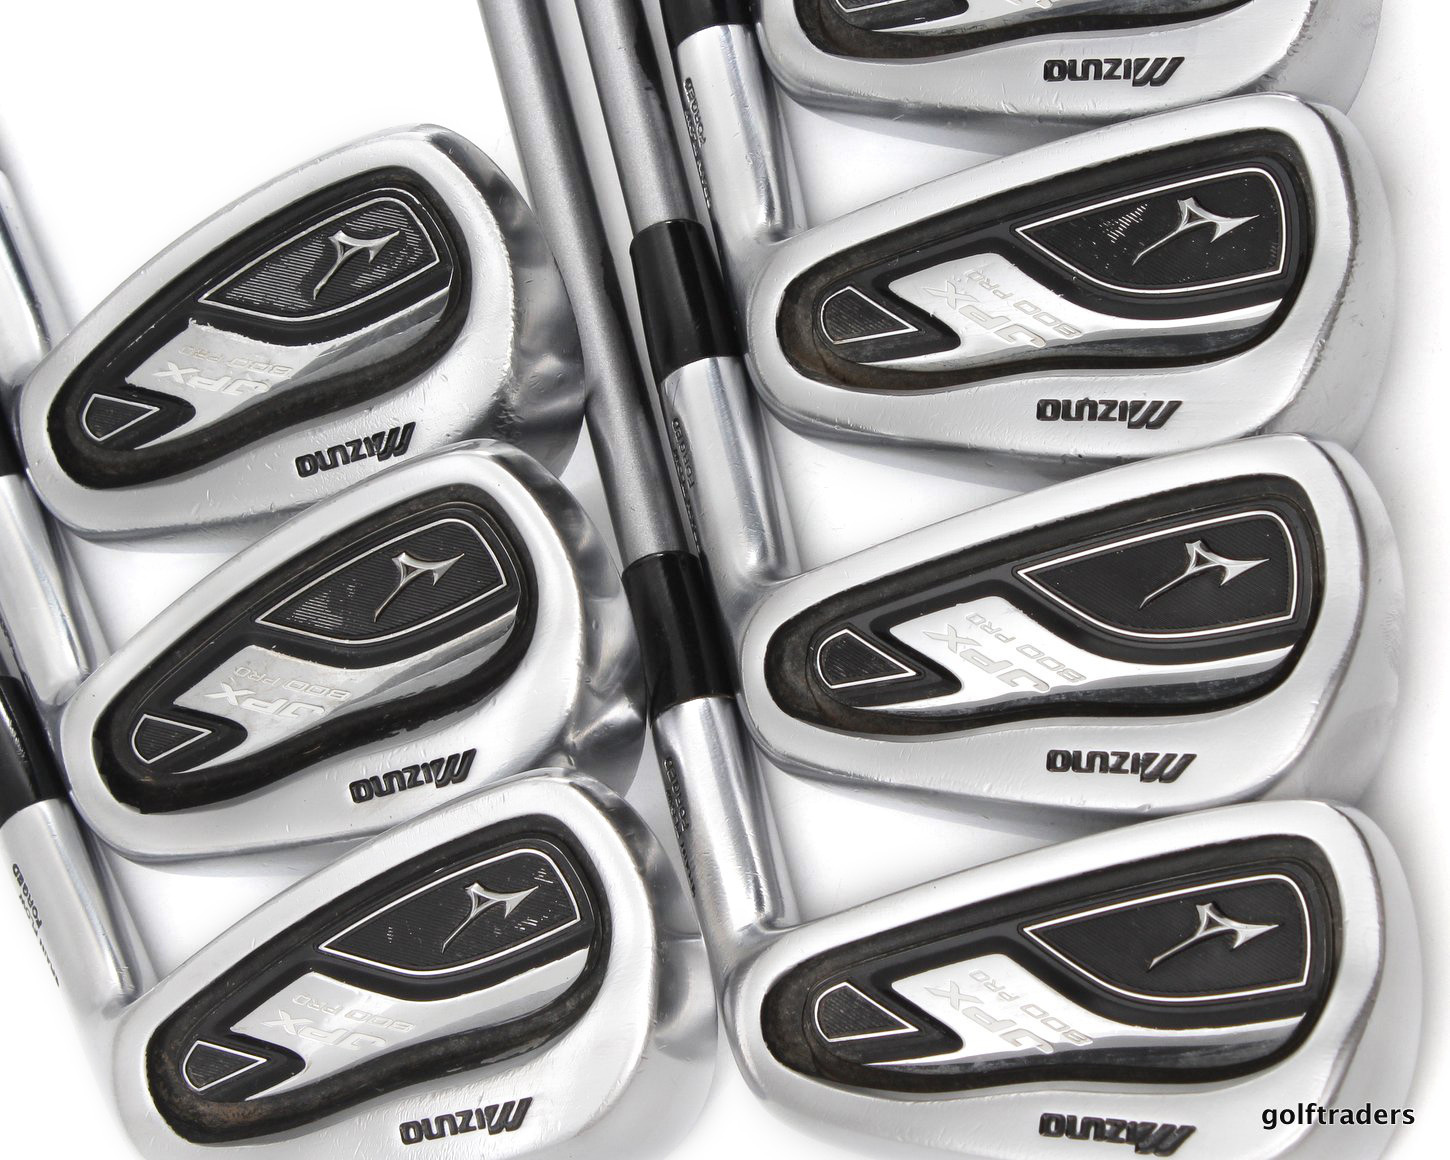 mizuno jpx 800 irons for sale